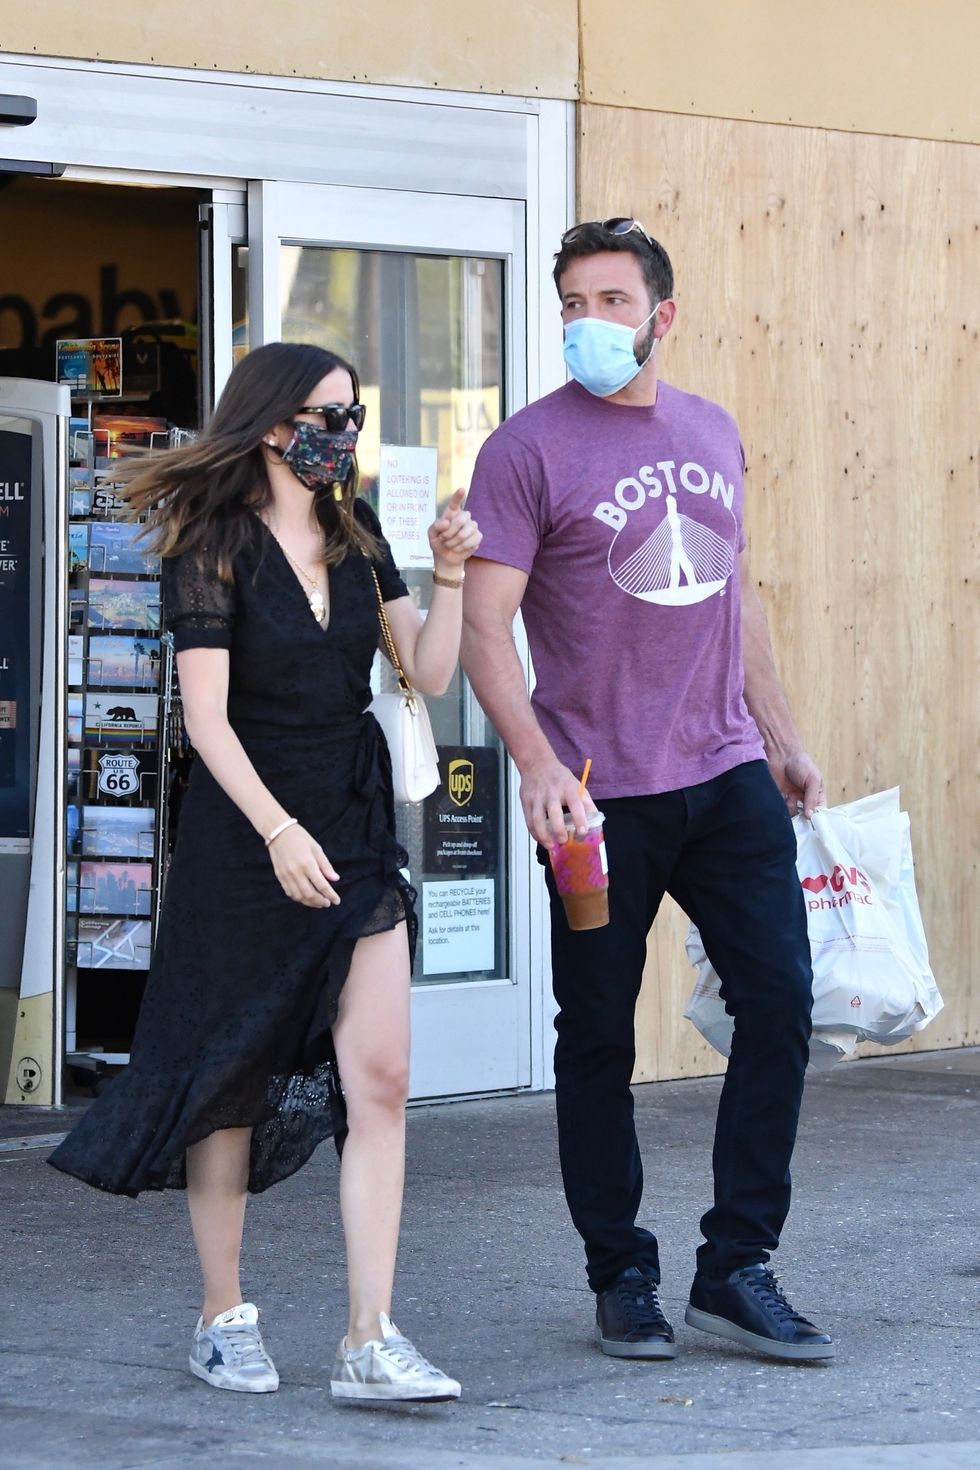 ben and ana walk out of whole foods, carrying a plastic bag